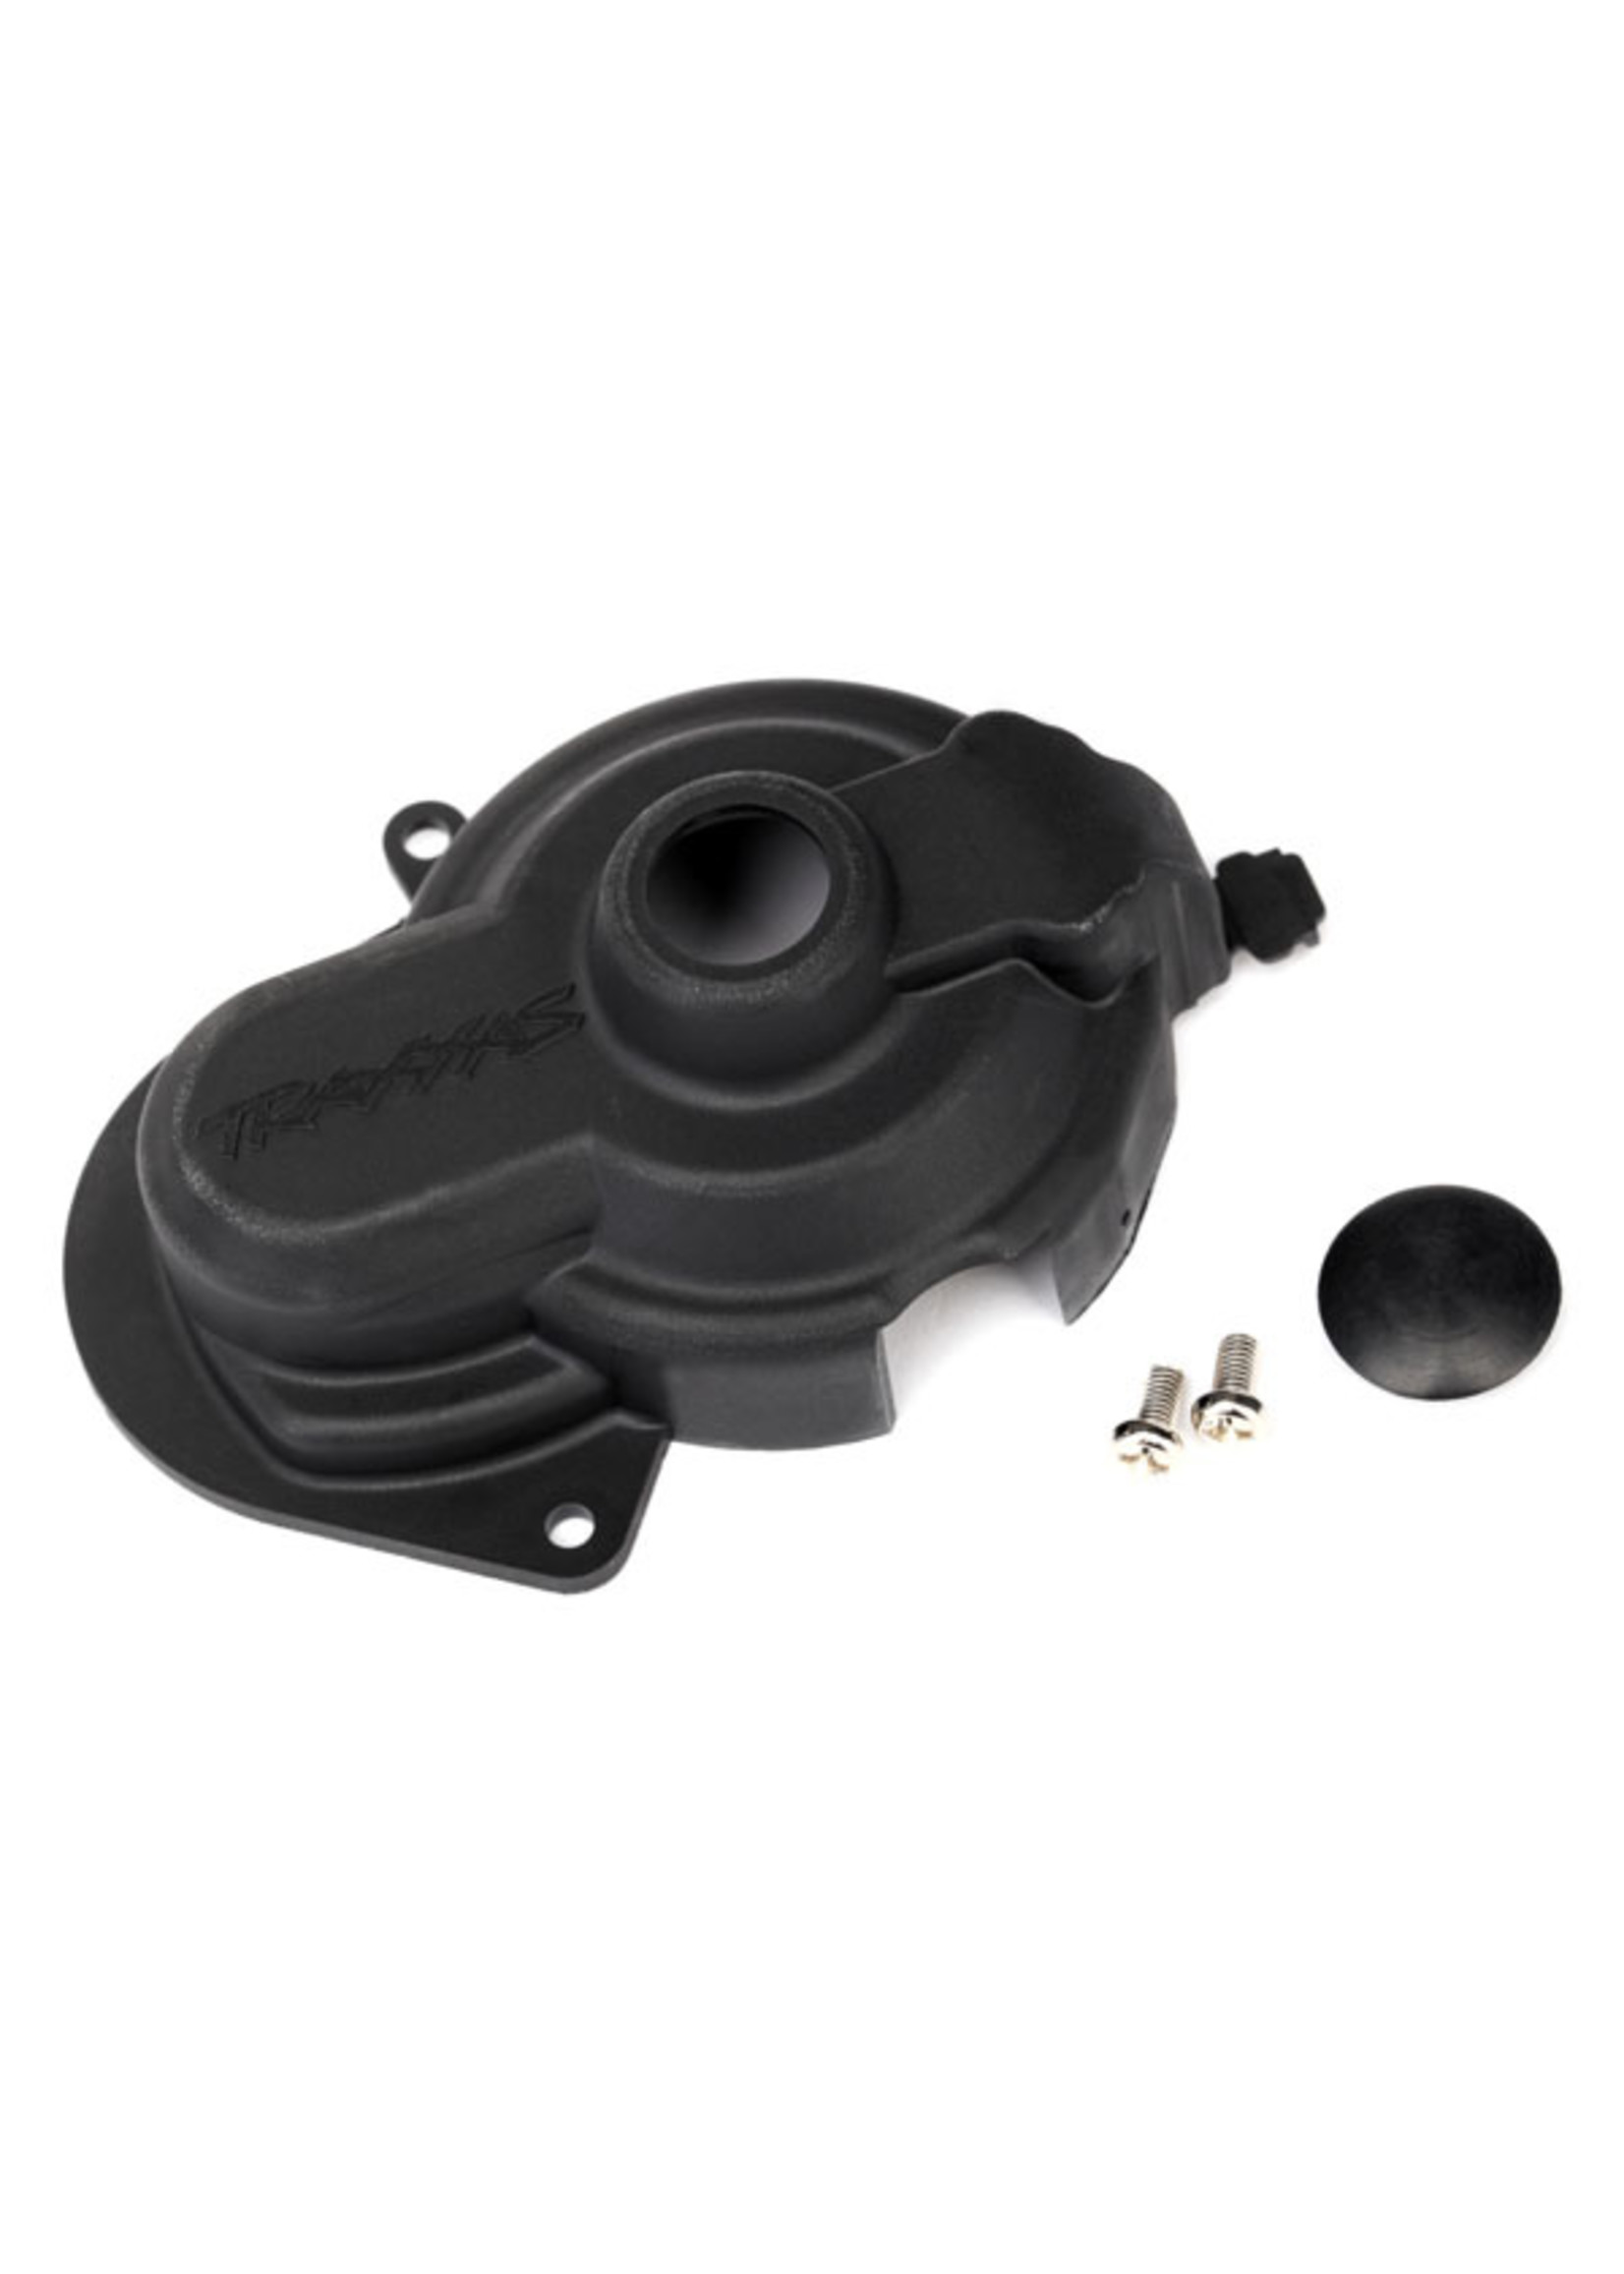 Traxxas 3792 - Dust Cover with Rubber Plug and Screws